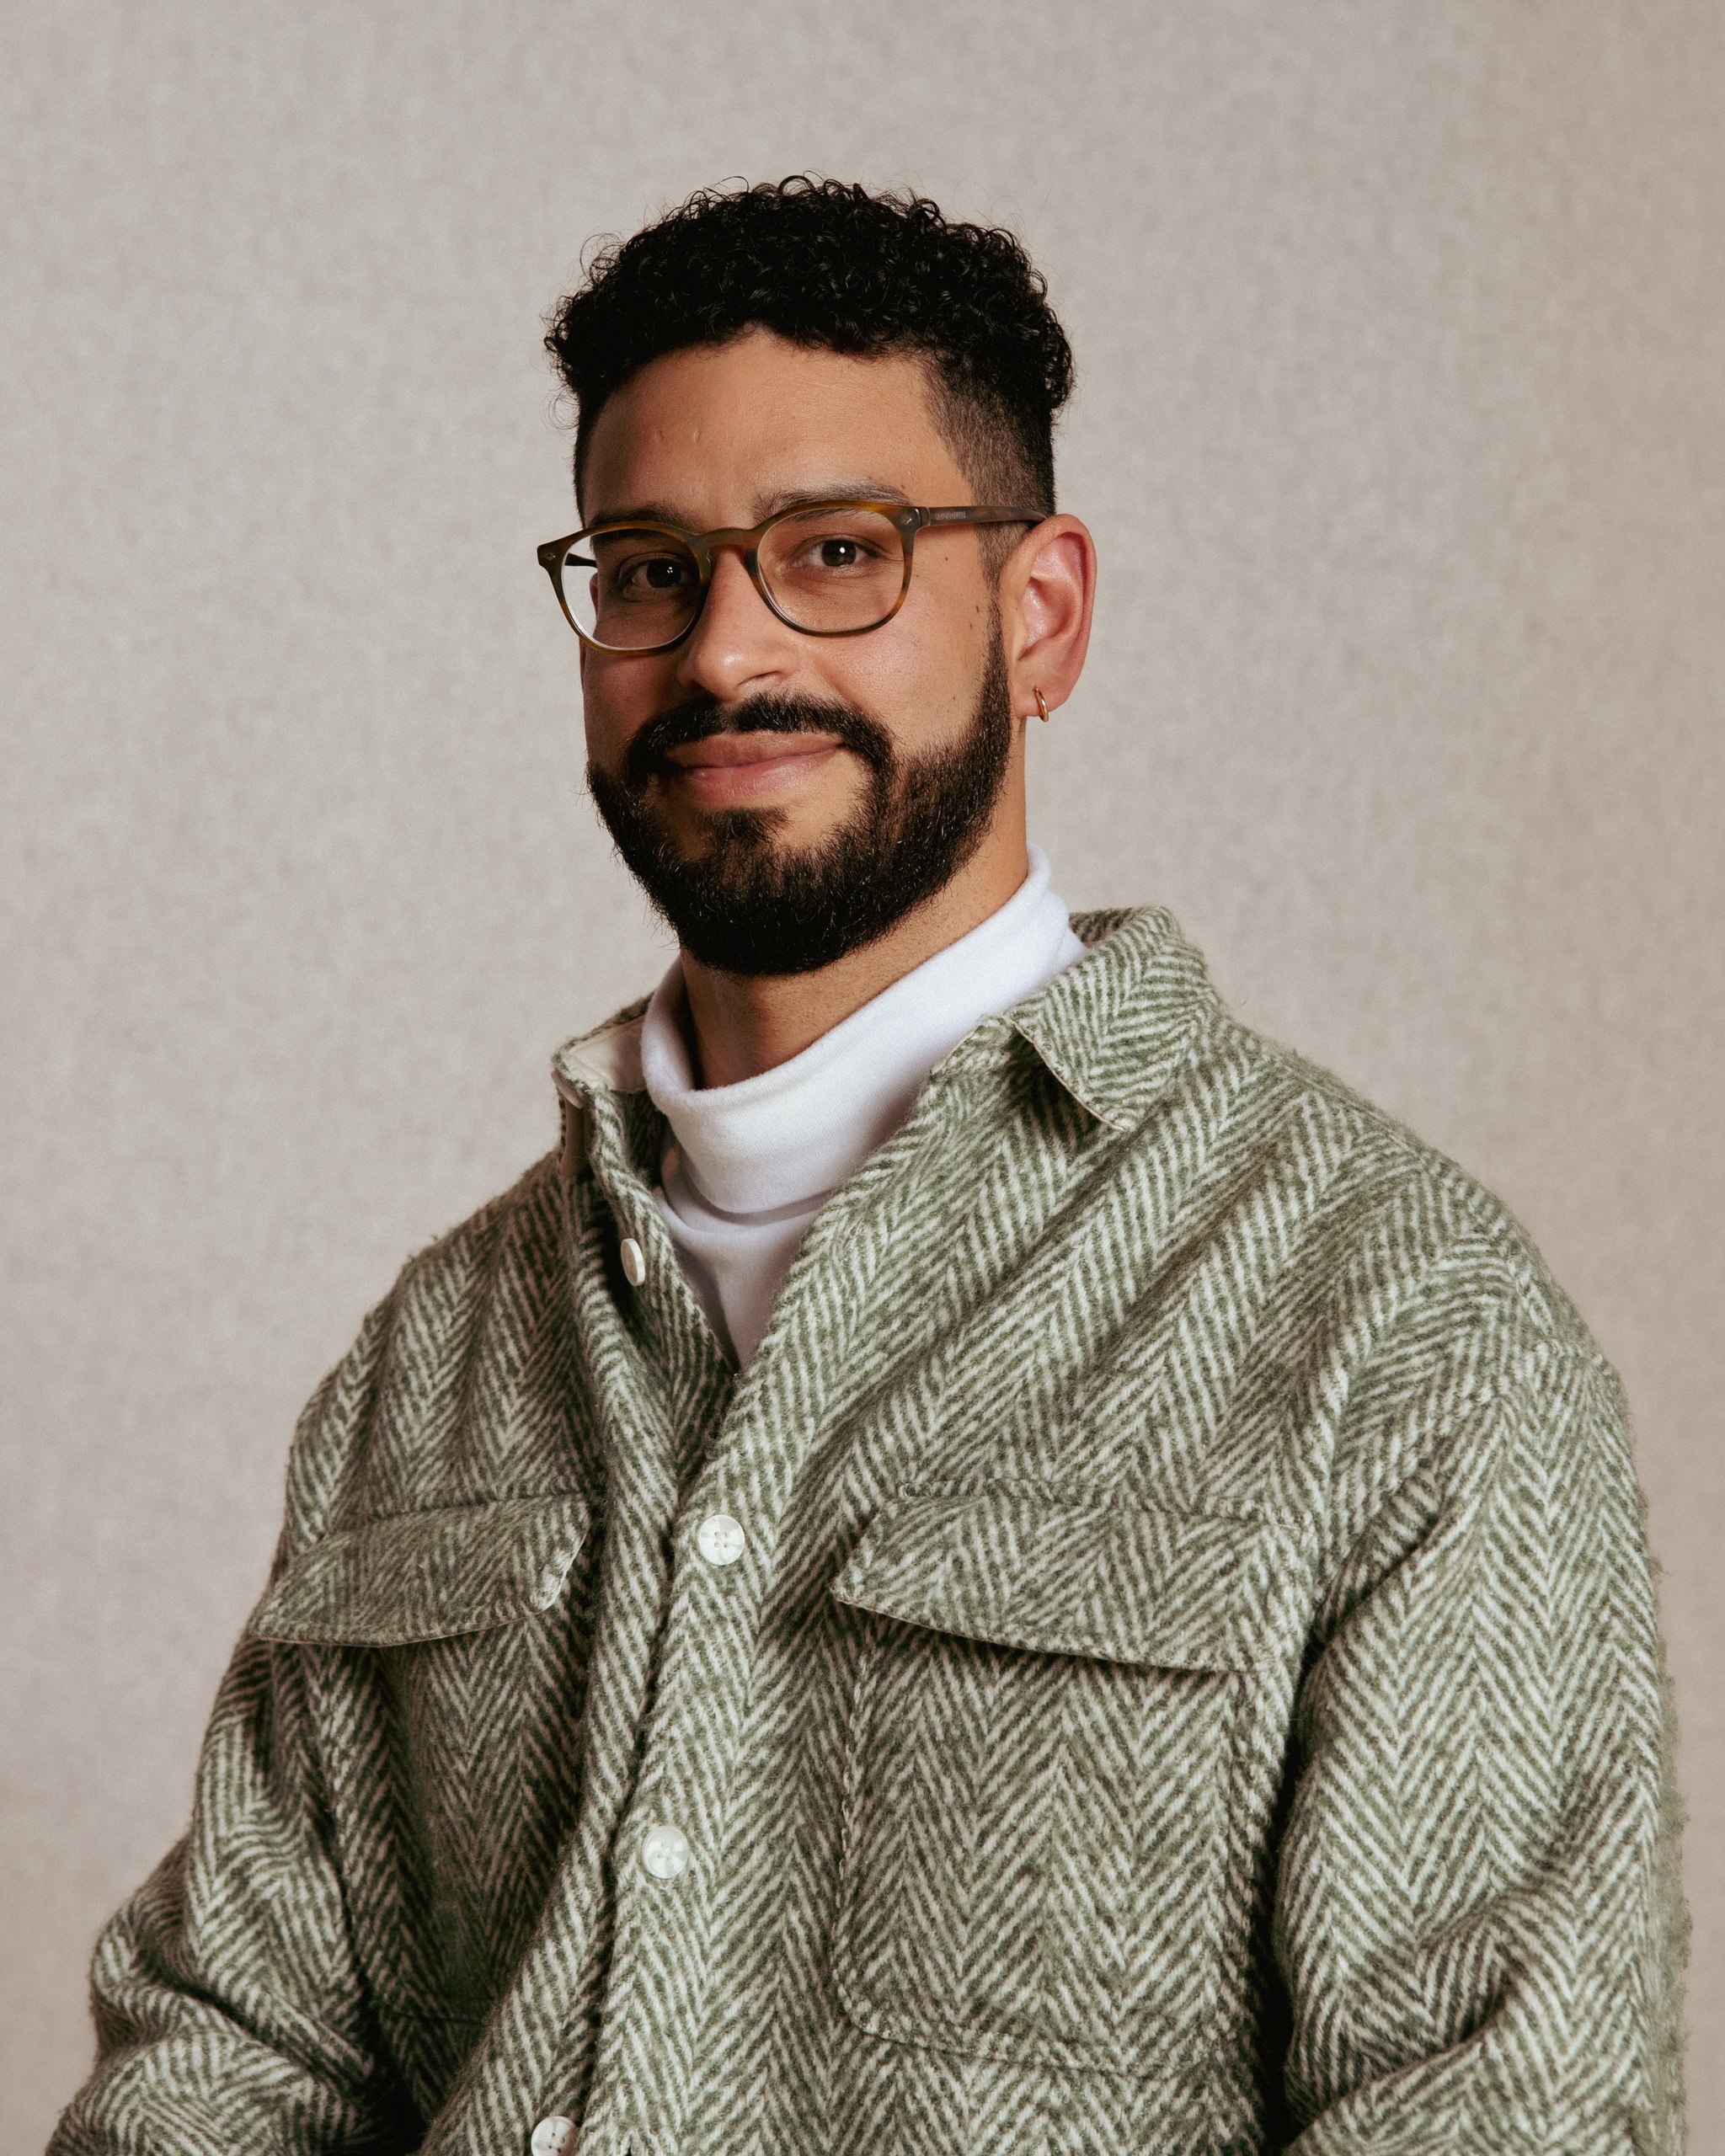 A portrait of Luis A. Gutierrez, a Colombian man who poses against a plain beige background. He sits with arms at either side, wearing a green herringbone shirt buttoned over a white turtle neck. He has a dark beard and mustache and wears glasses. Photo by Dana Golan